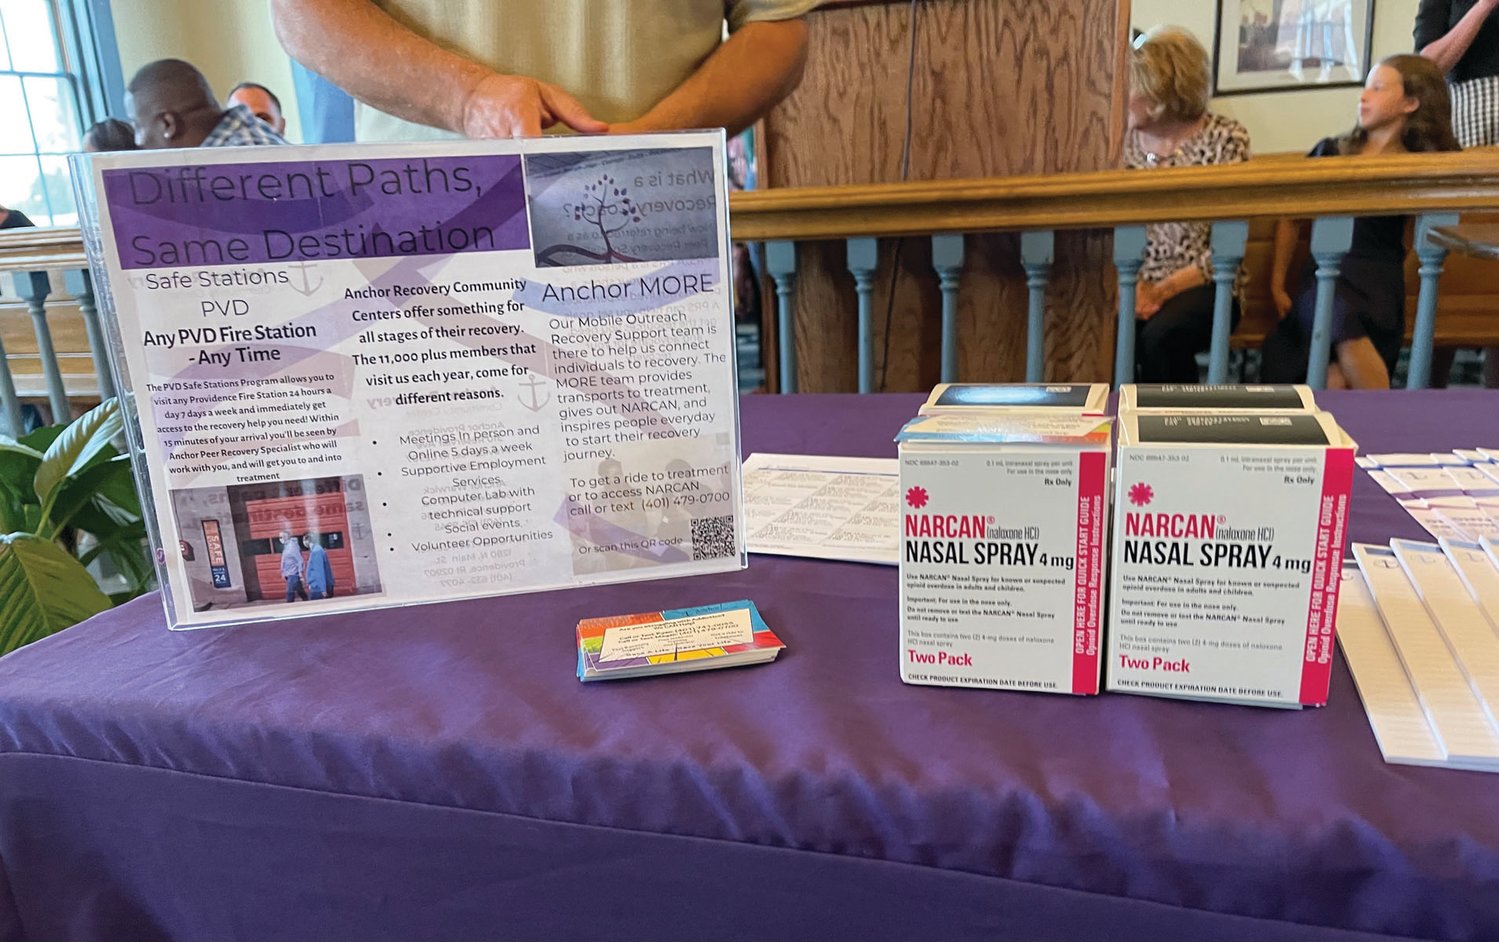 SAVING LIVES: Free doses of Narcan were available for participants in last week’s Recovery Month event, along with other information and resources. Megan Perry of Anchor Recovery said the group has distributed more than 5,000 doses of Narcan since the start of the year, and roughly 200 people have reported using it to save someone’s life.